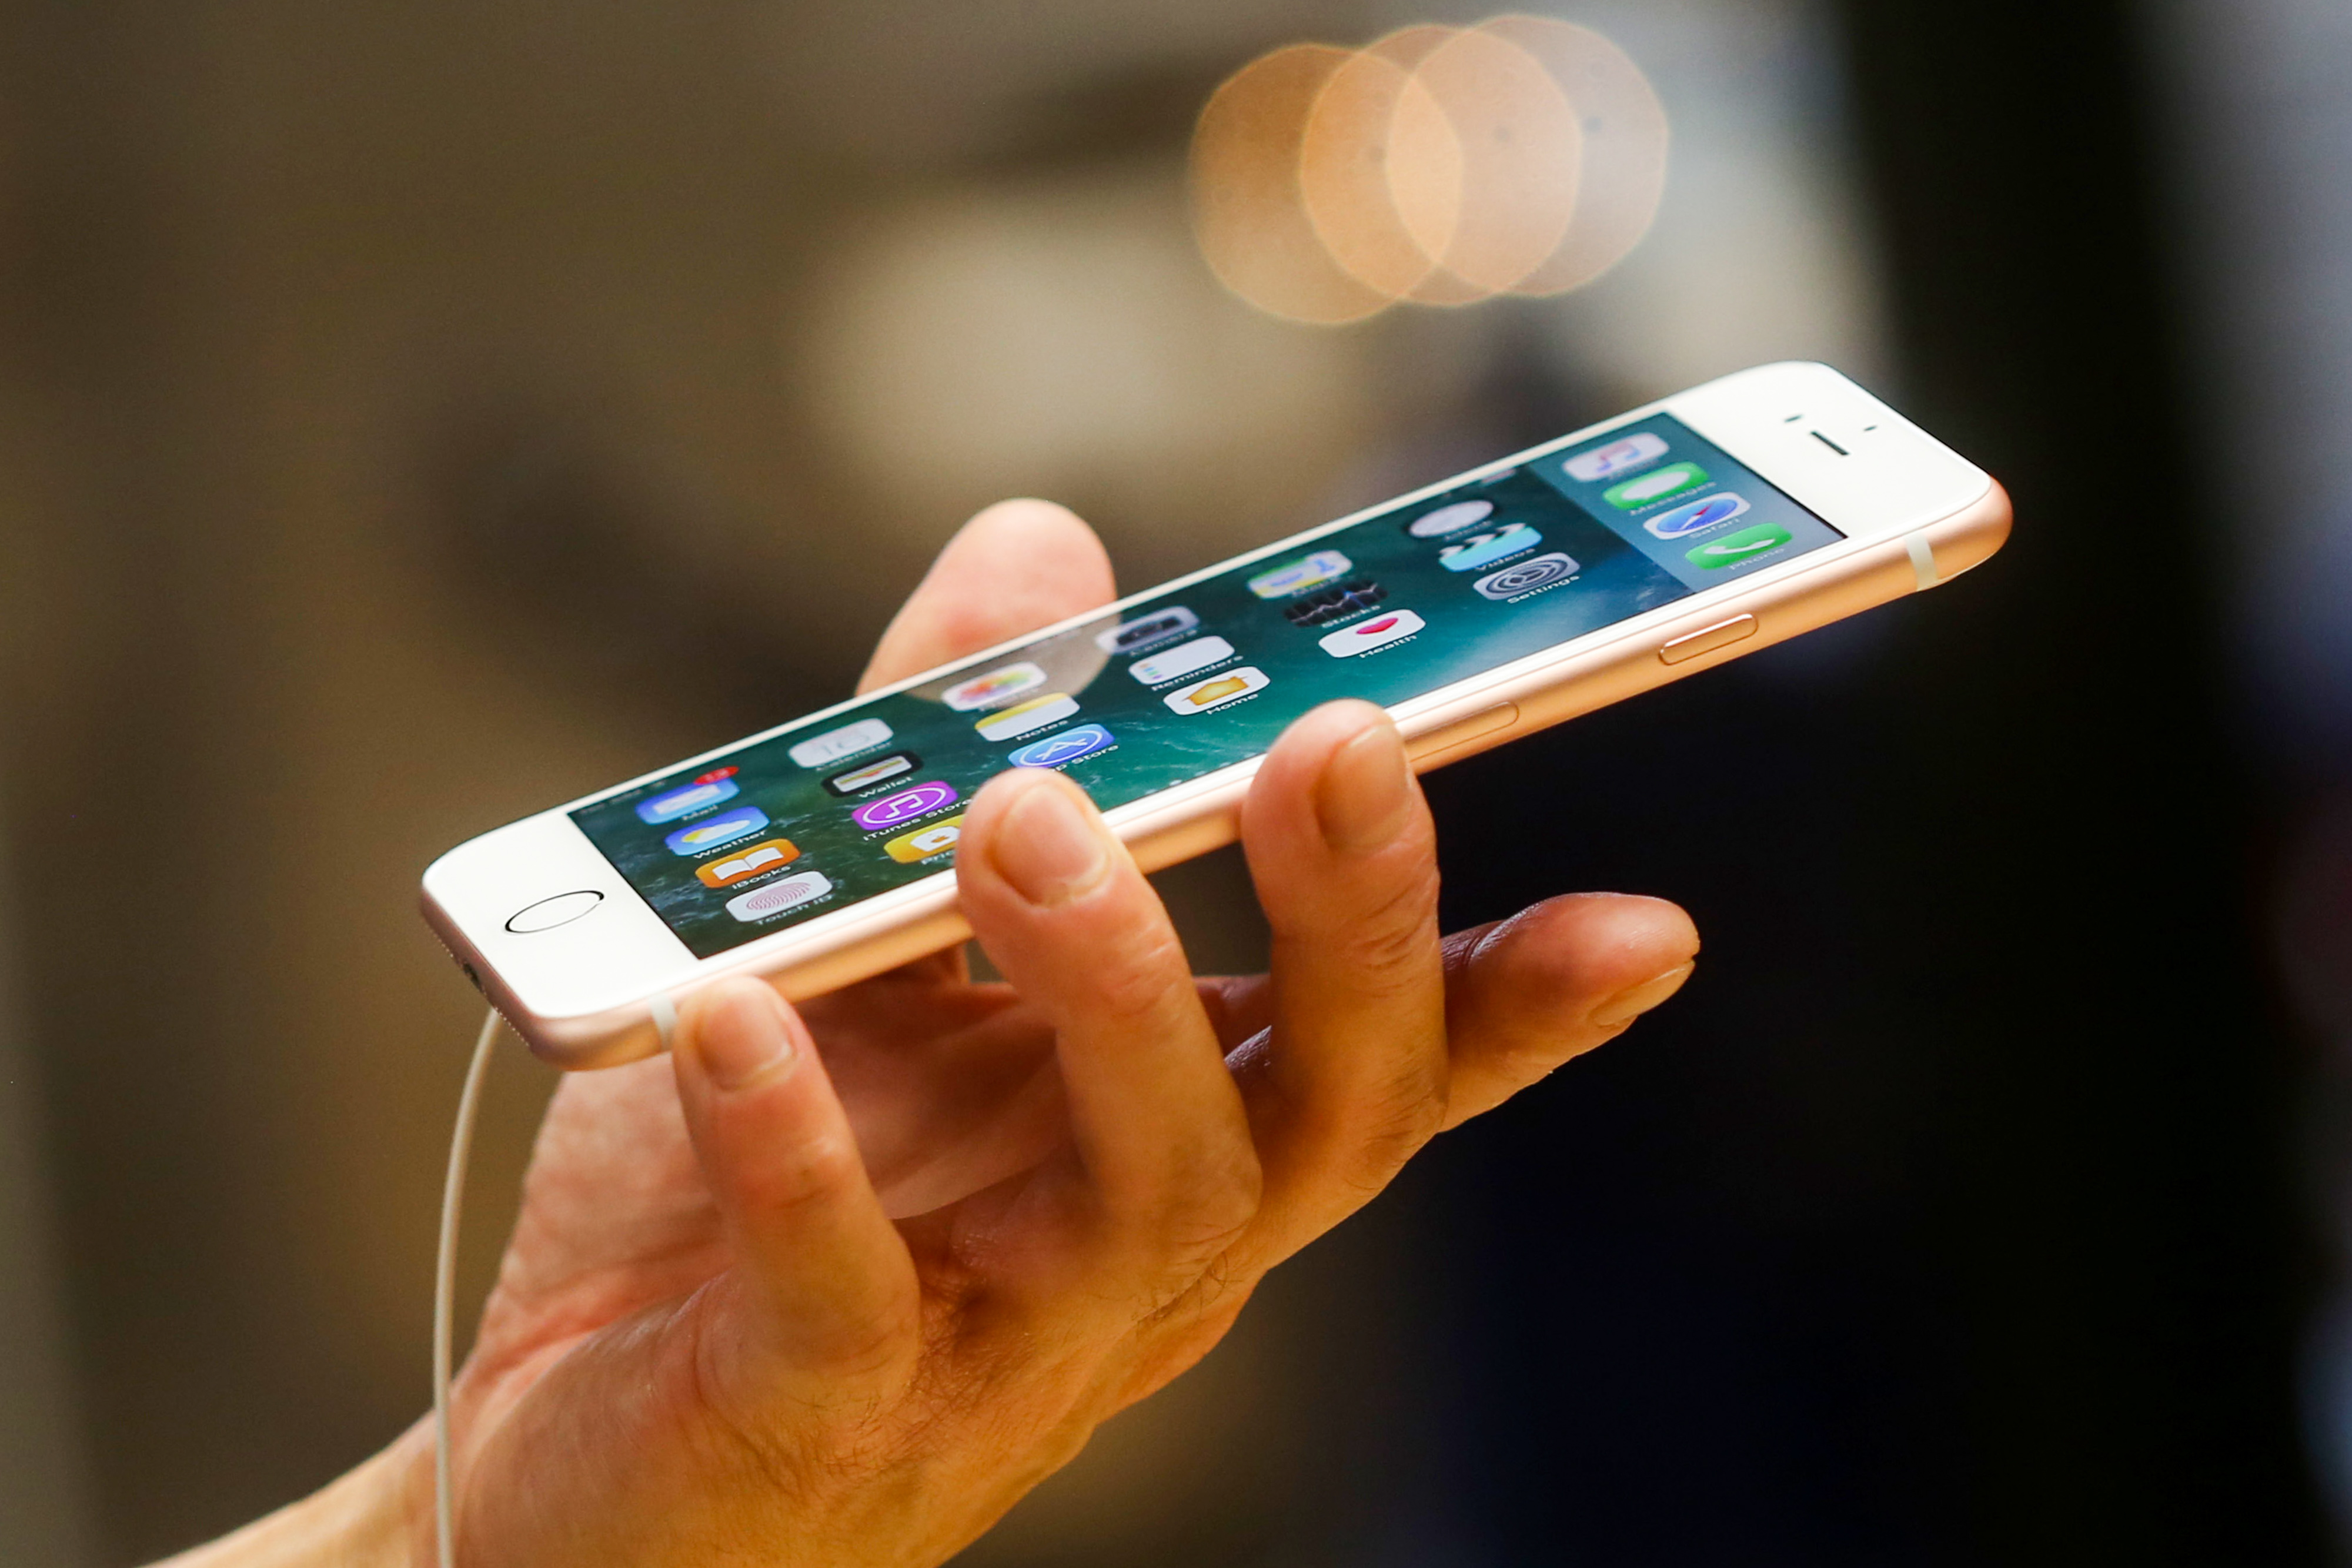 A customer inspects a new iPhone 7 plus smartphone inside the Apple Inc. Covent Garden store in London, U.K., on Friday, Sept. 16, 2016. (Bloomberg via Getty Images)